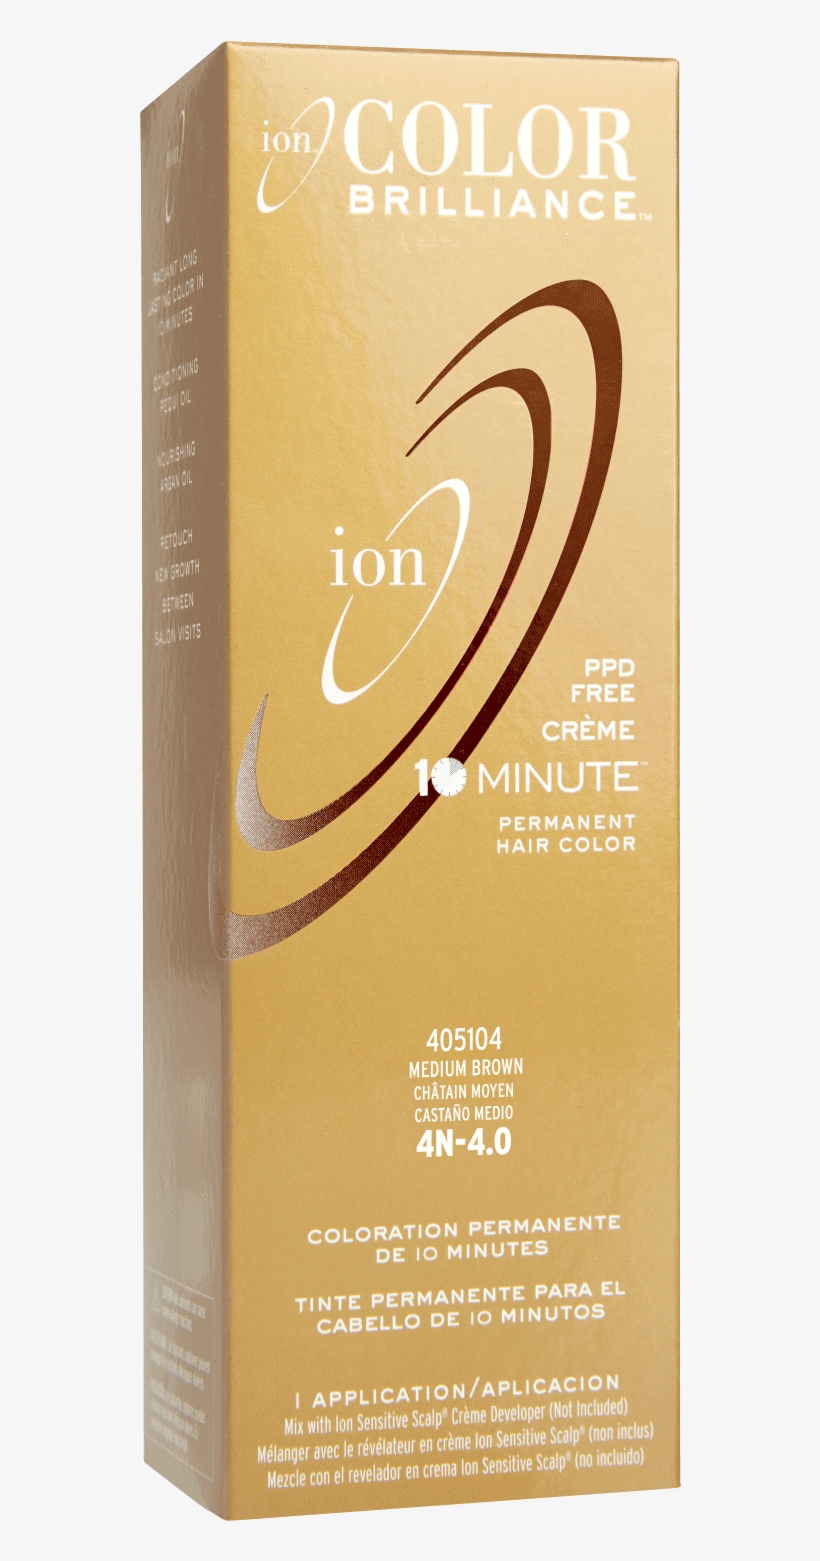 Ion 4n Medium Brown Permanent Creme Hair Color By Color - Color Brilliance Ion 4n 4.0, transparent png #4847589